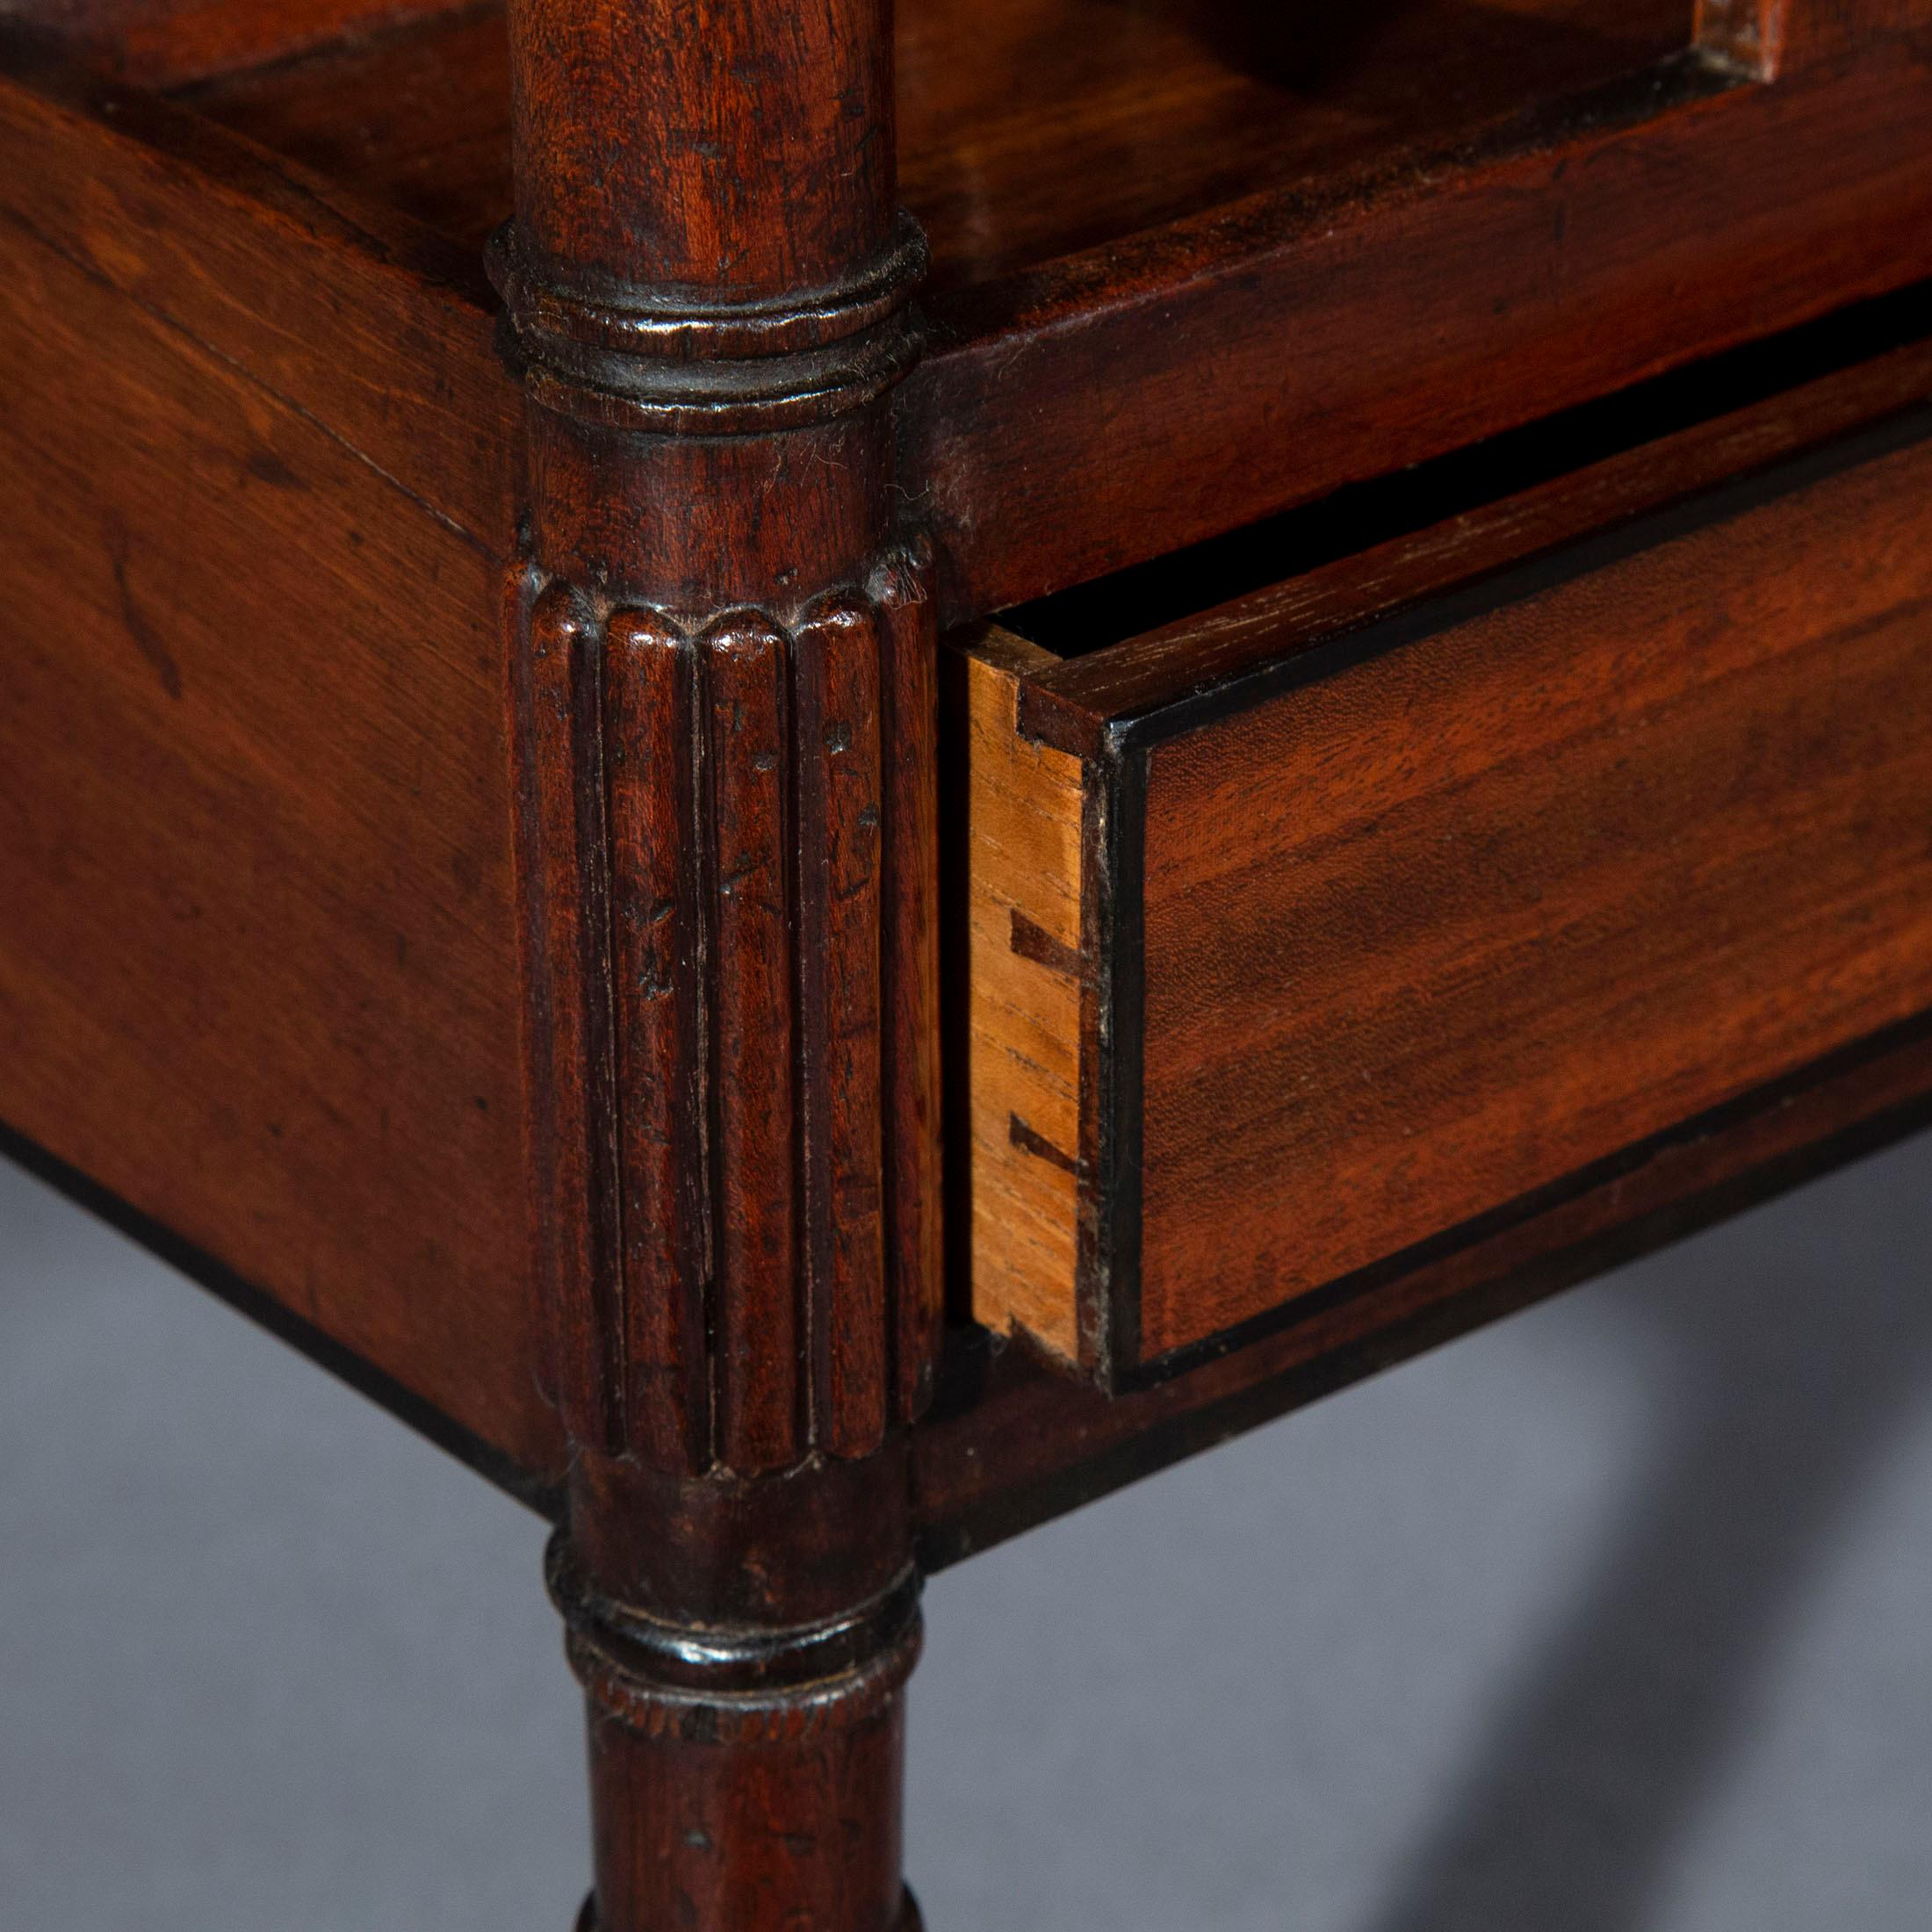 Hand-Carved Antique Magazine Rack, Early 19th Century